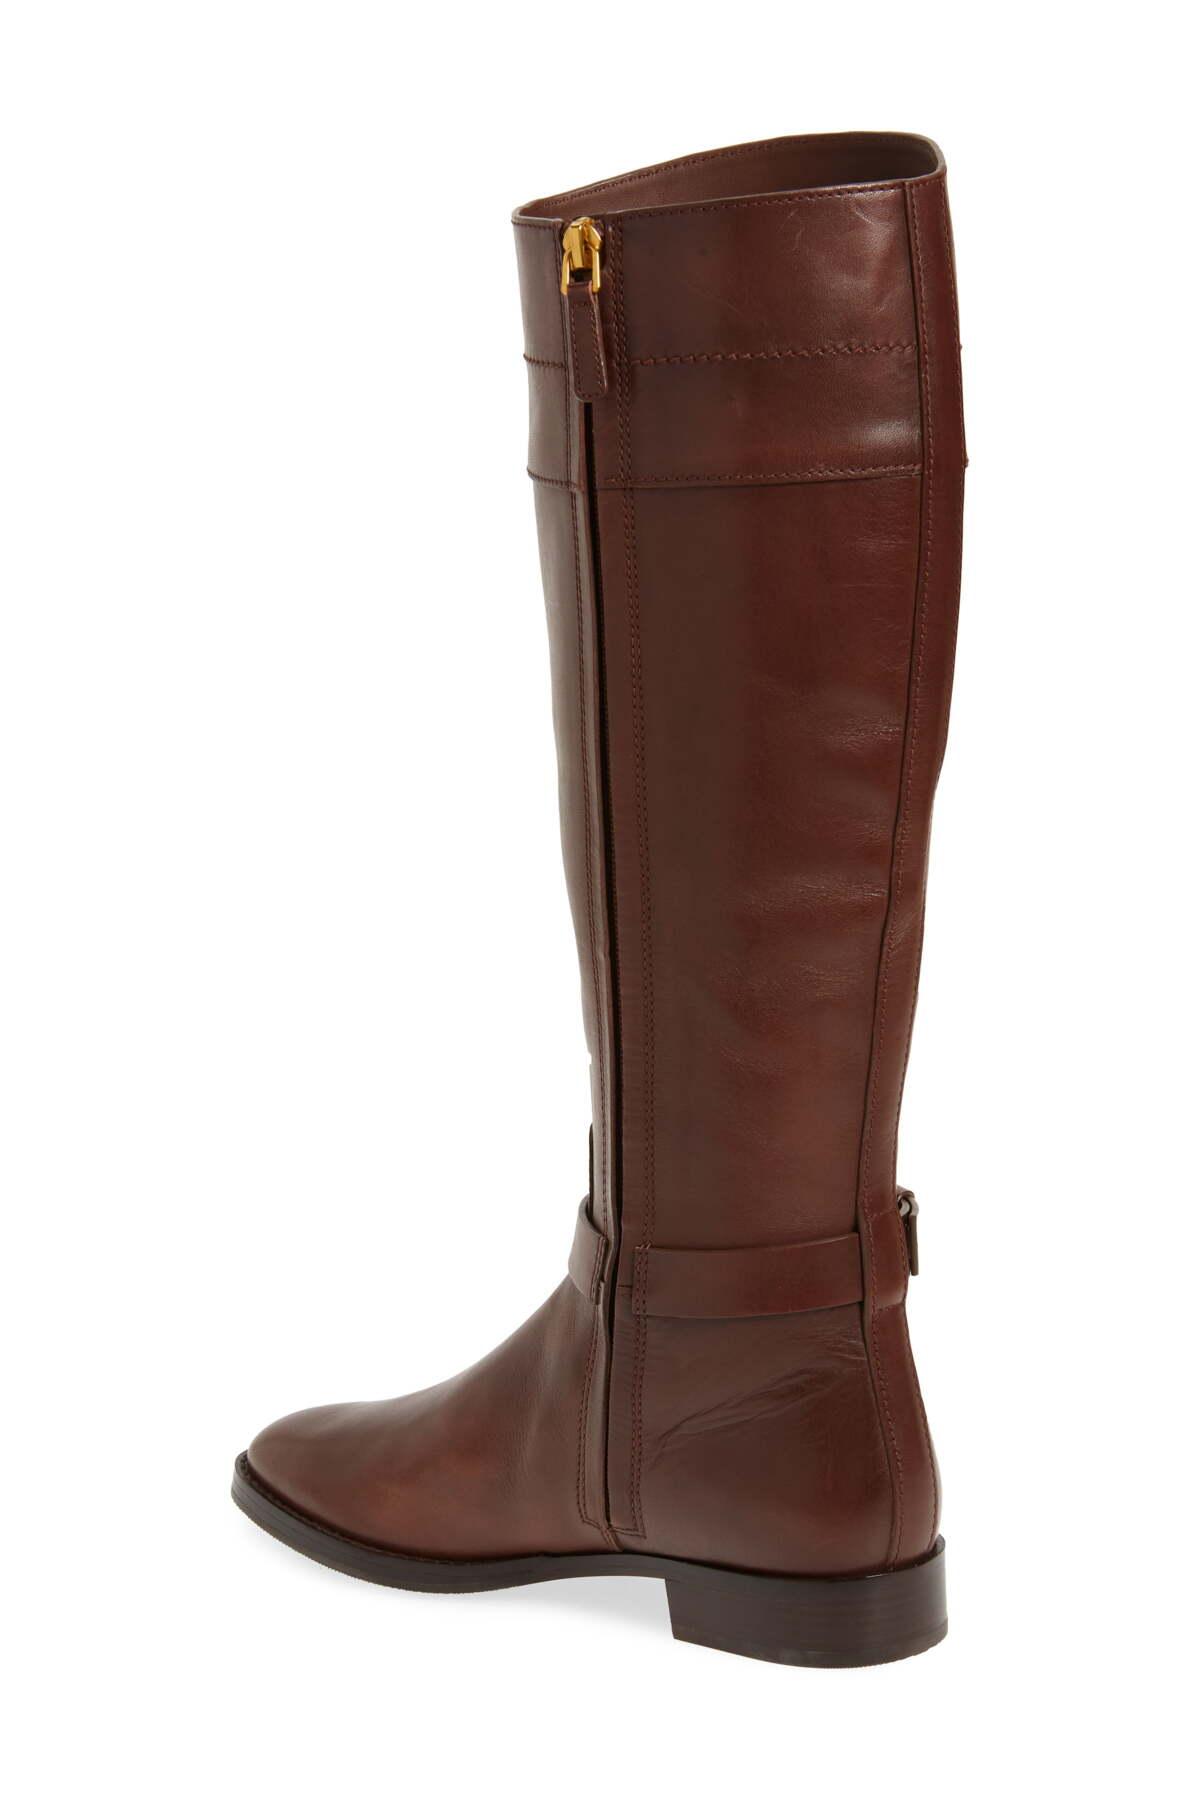 Tory Burch Leather Everly Knee High Boot In Brown Lyst